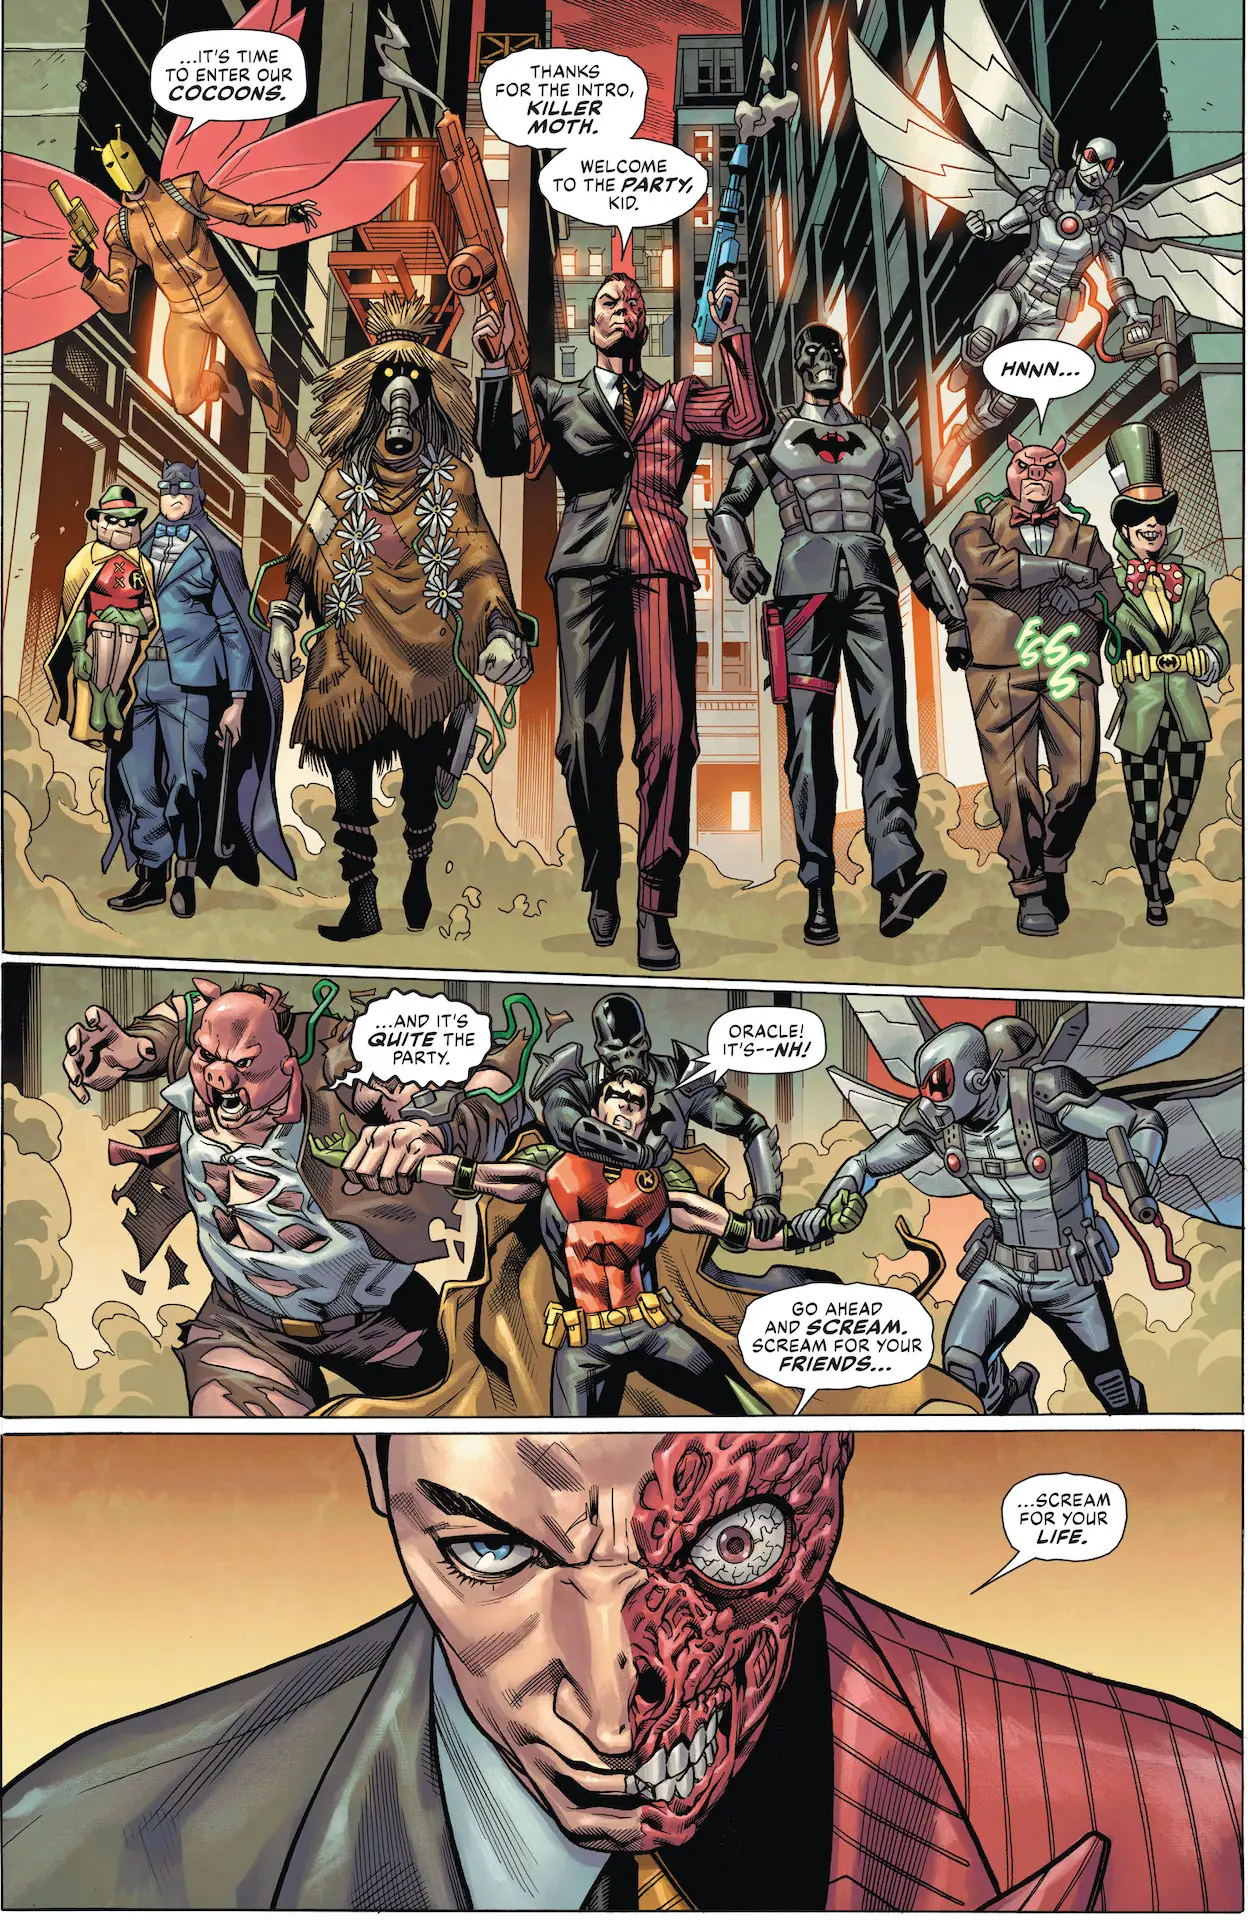 Two-Face leads an army of supervillains